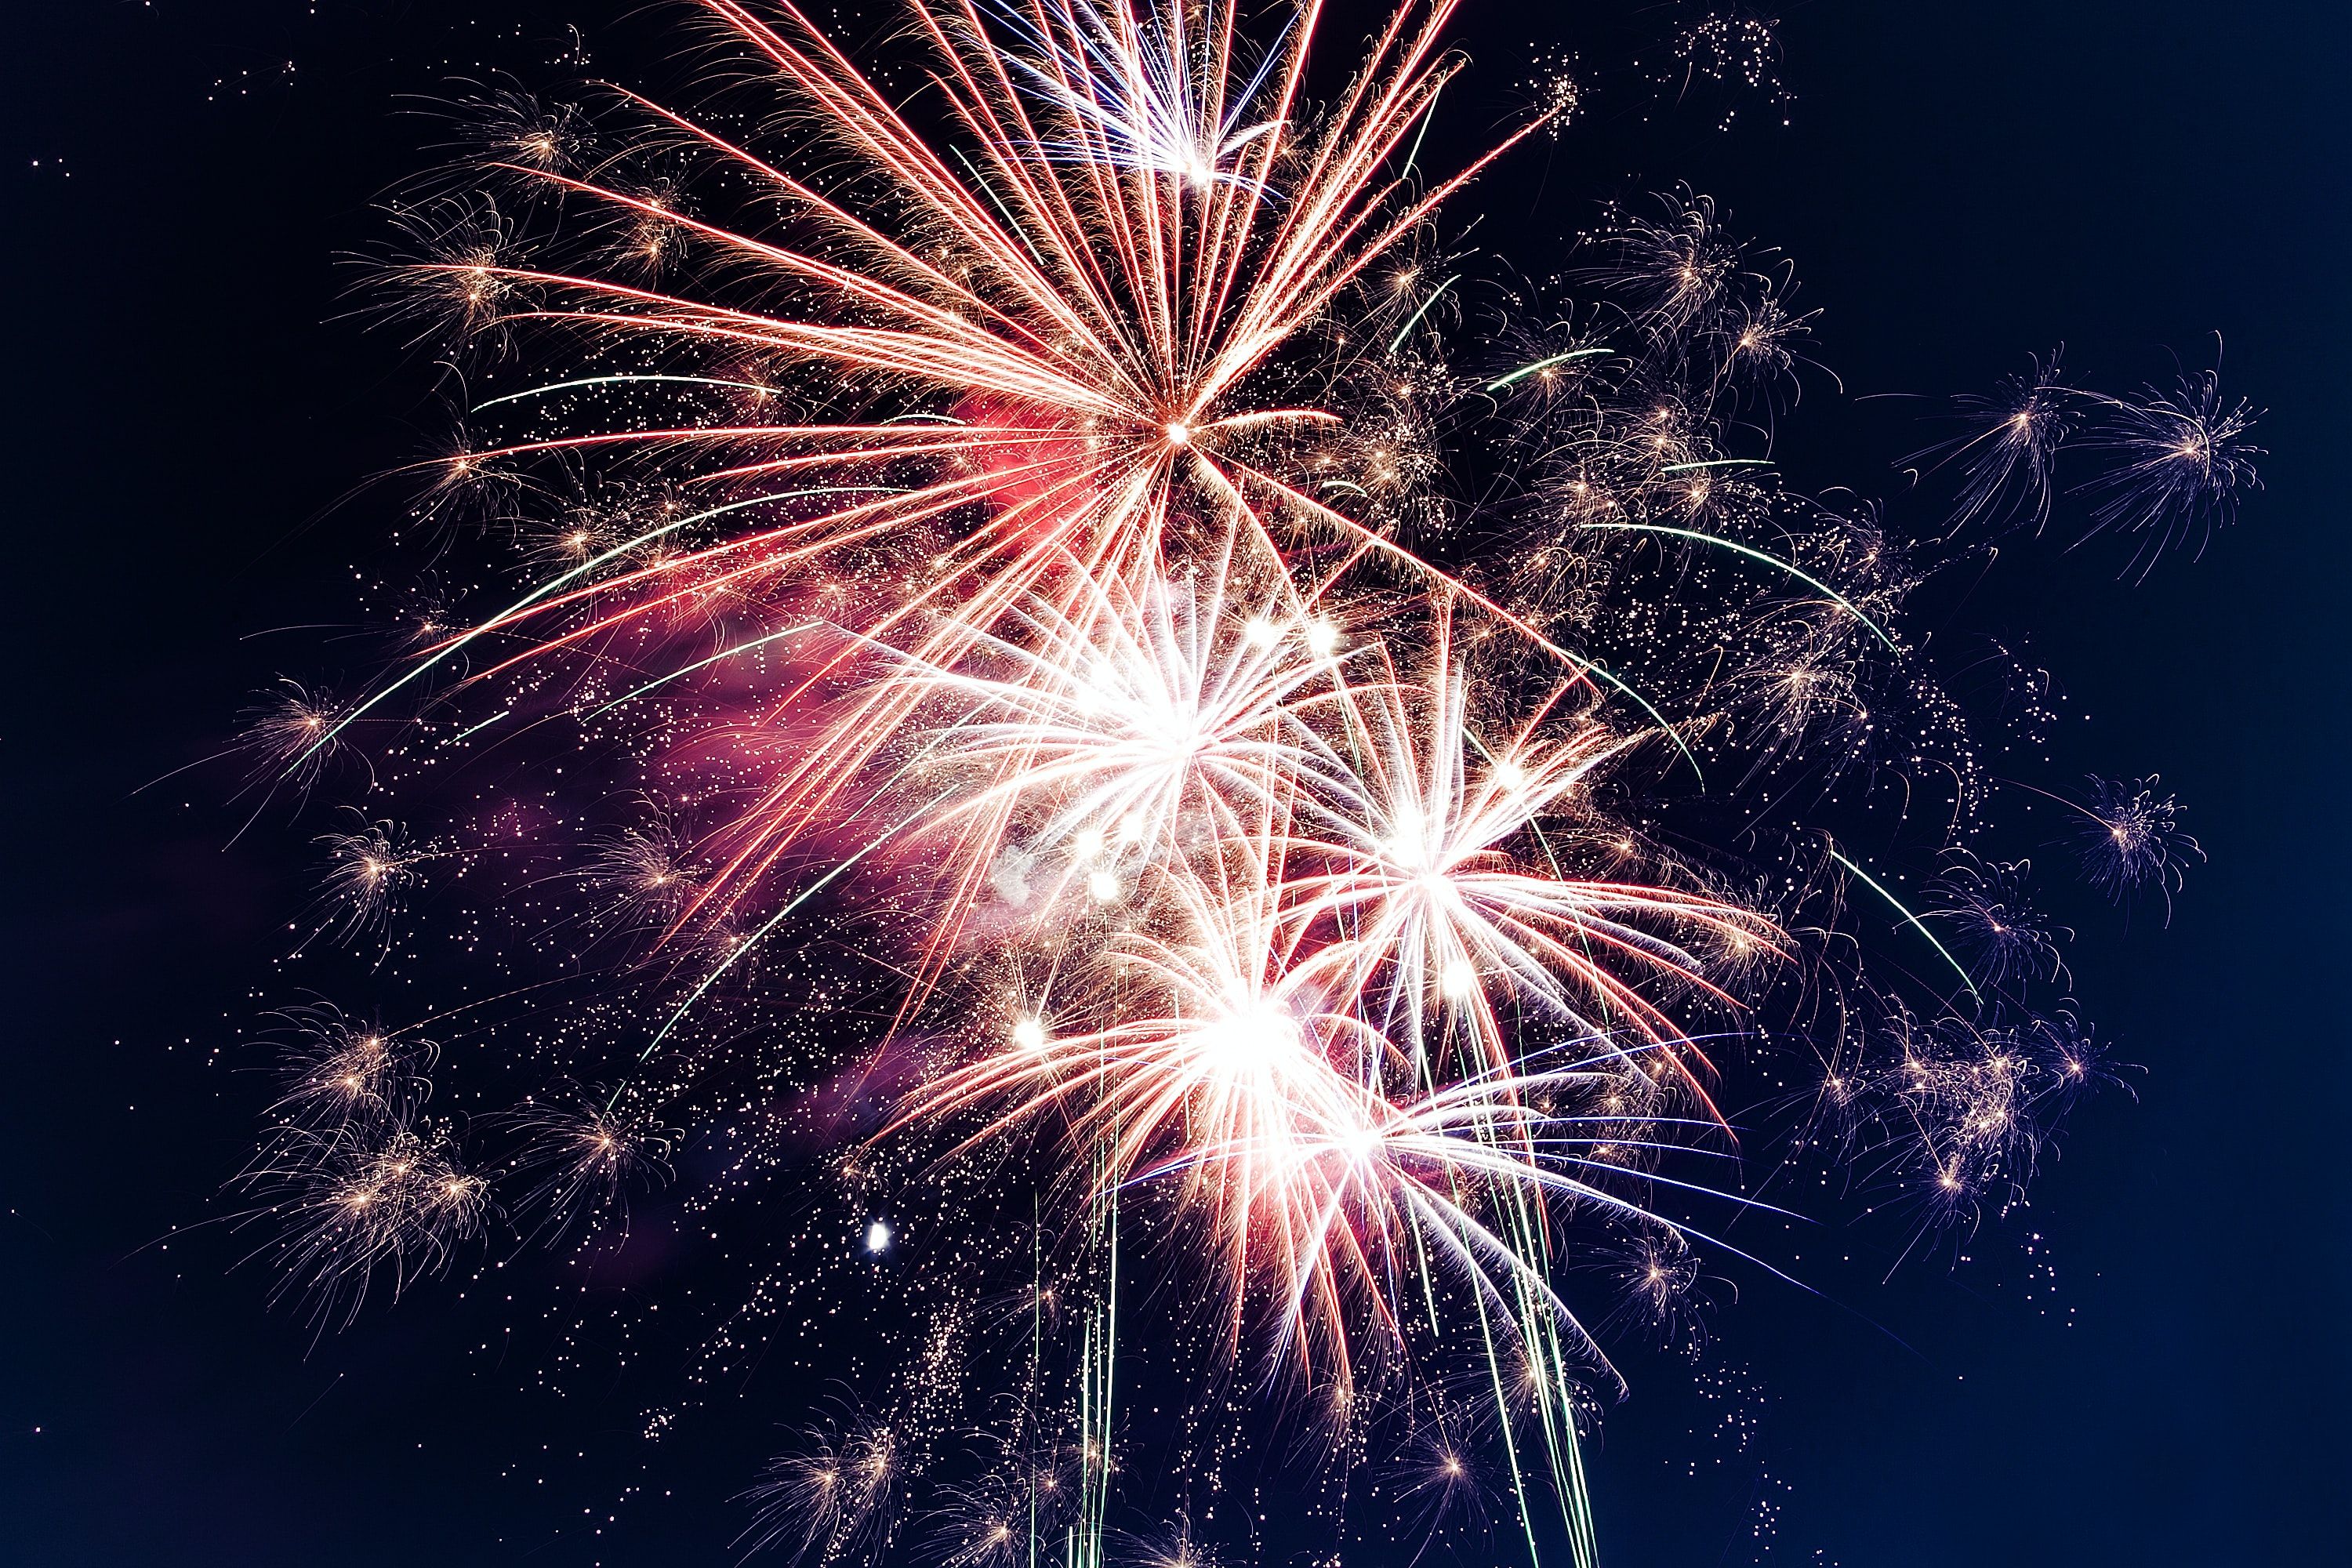 Fireworks Picture. Download Free Image